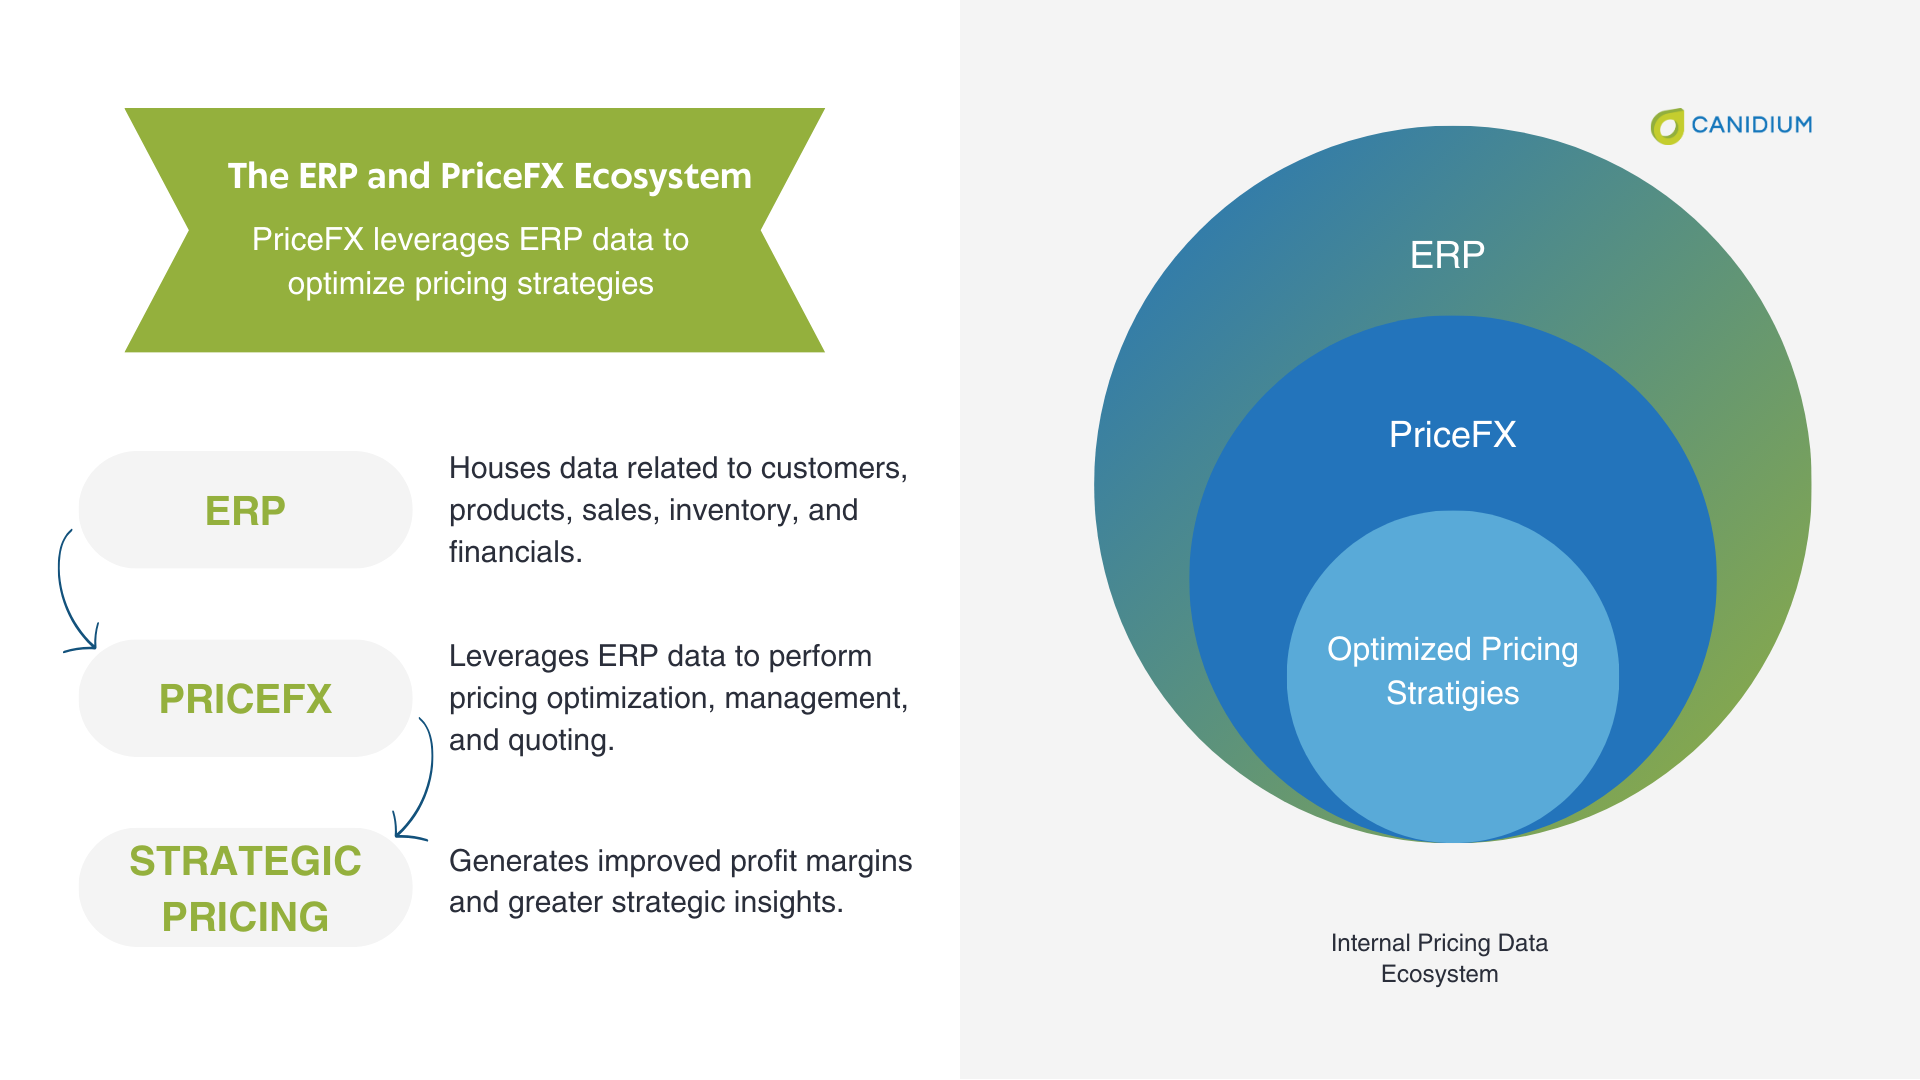 The ERP and Pricefx data ecosystem